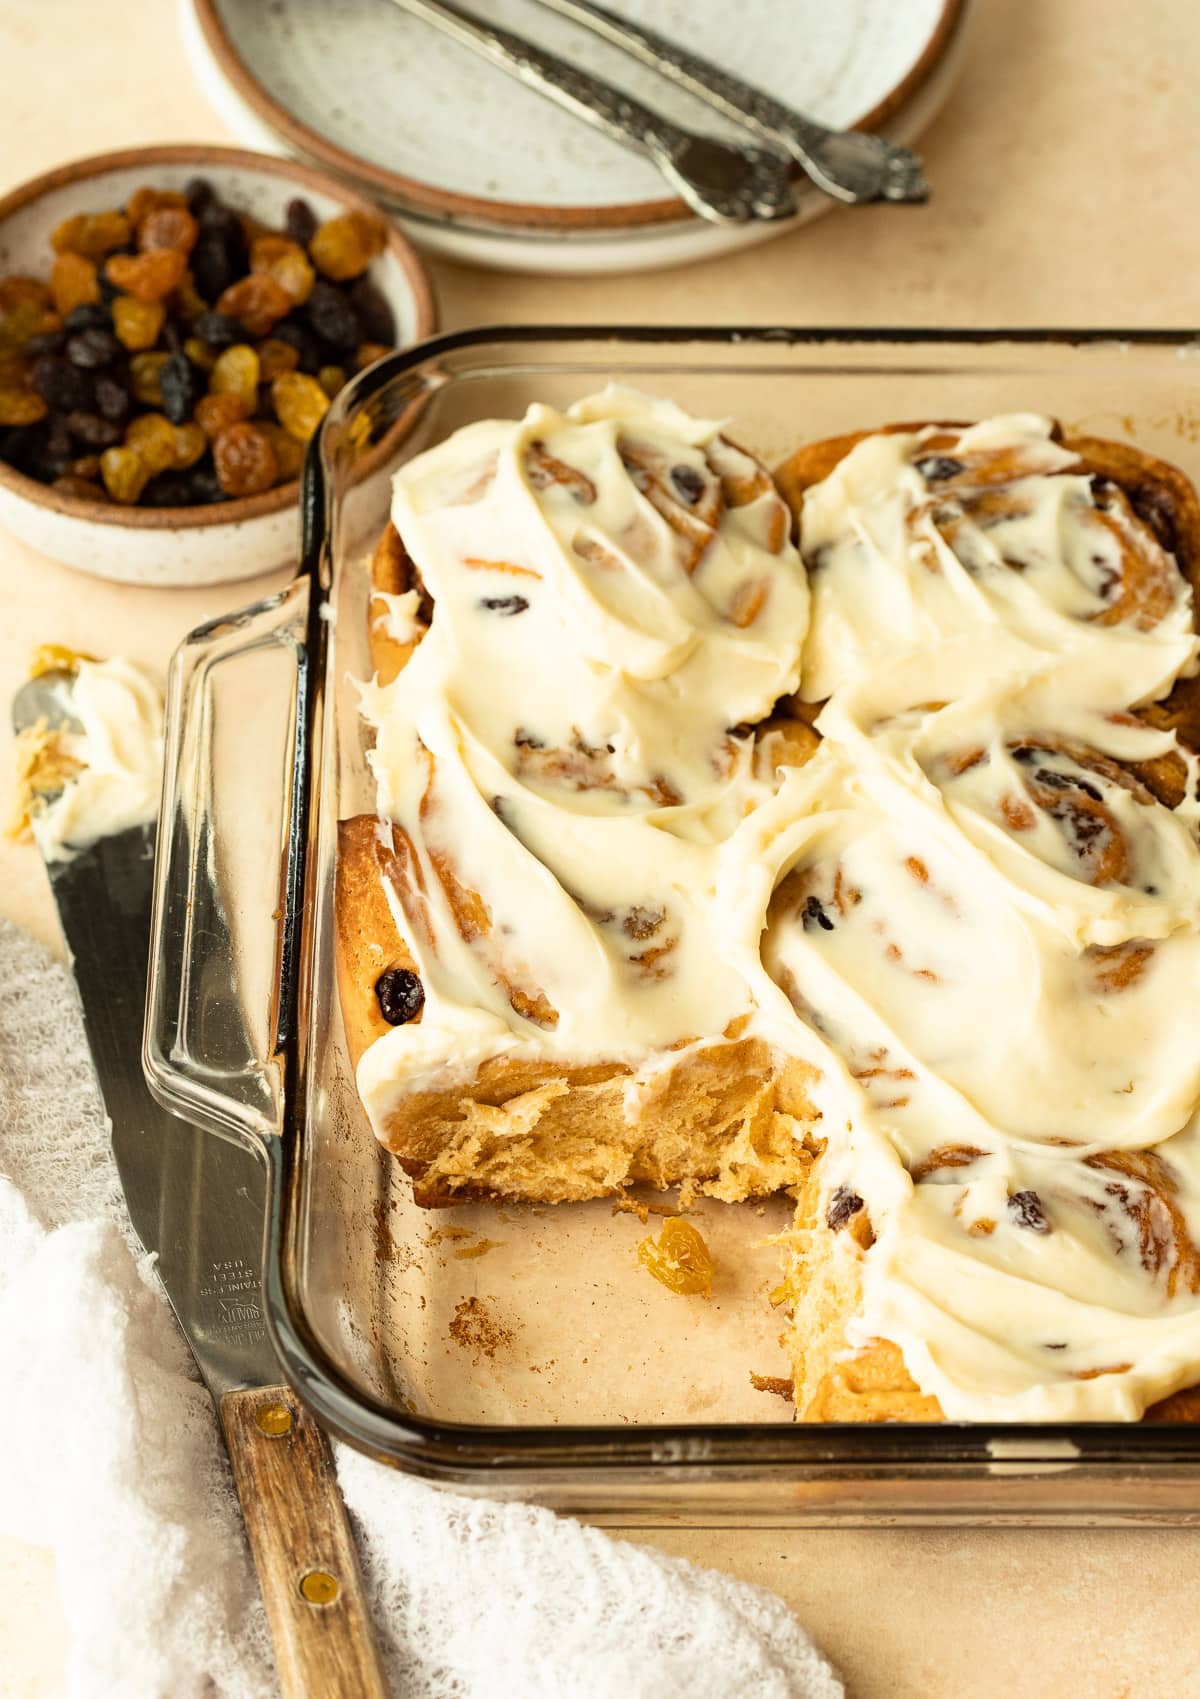 Homemade cinnamon rolls in a glass dish topped with frosting.